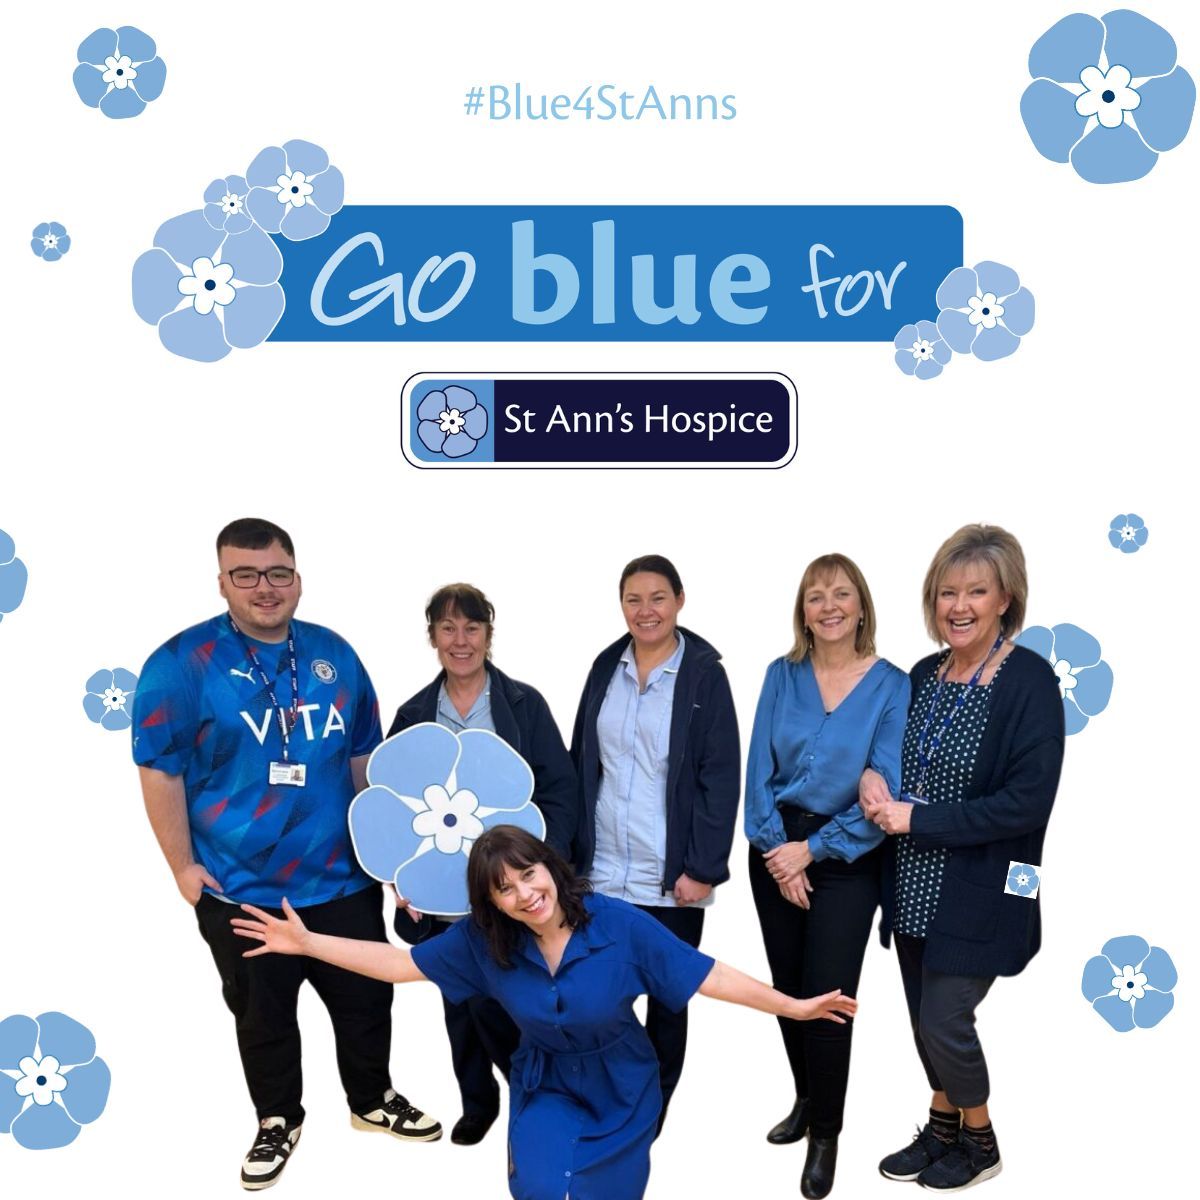 Throughout the month of May, we want to encourage you to go blue. 💙 Whether you dress in blue, decorate blue, run in blue, craft in blue, or bake blue, get involved and make a real difference to our patients and their loved ones. Full details here: buff.ly/3JEIXQj